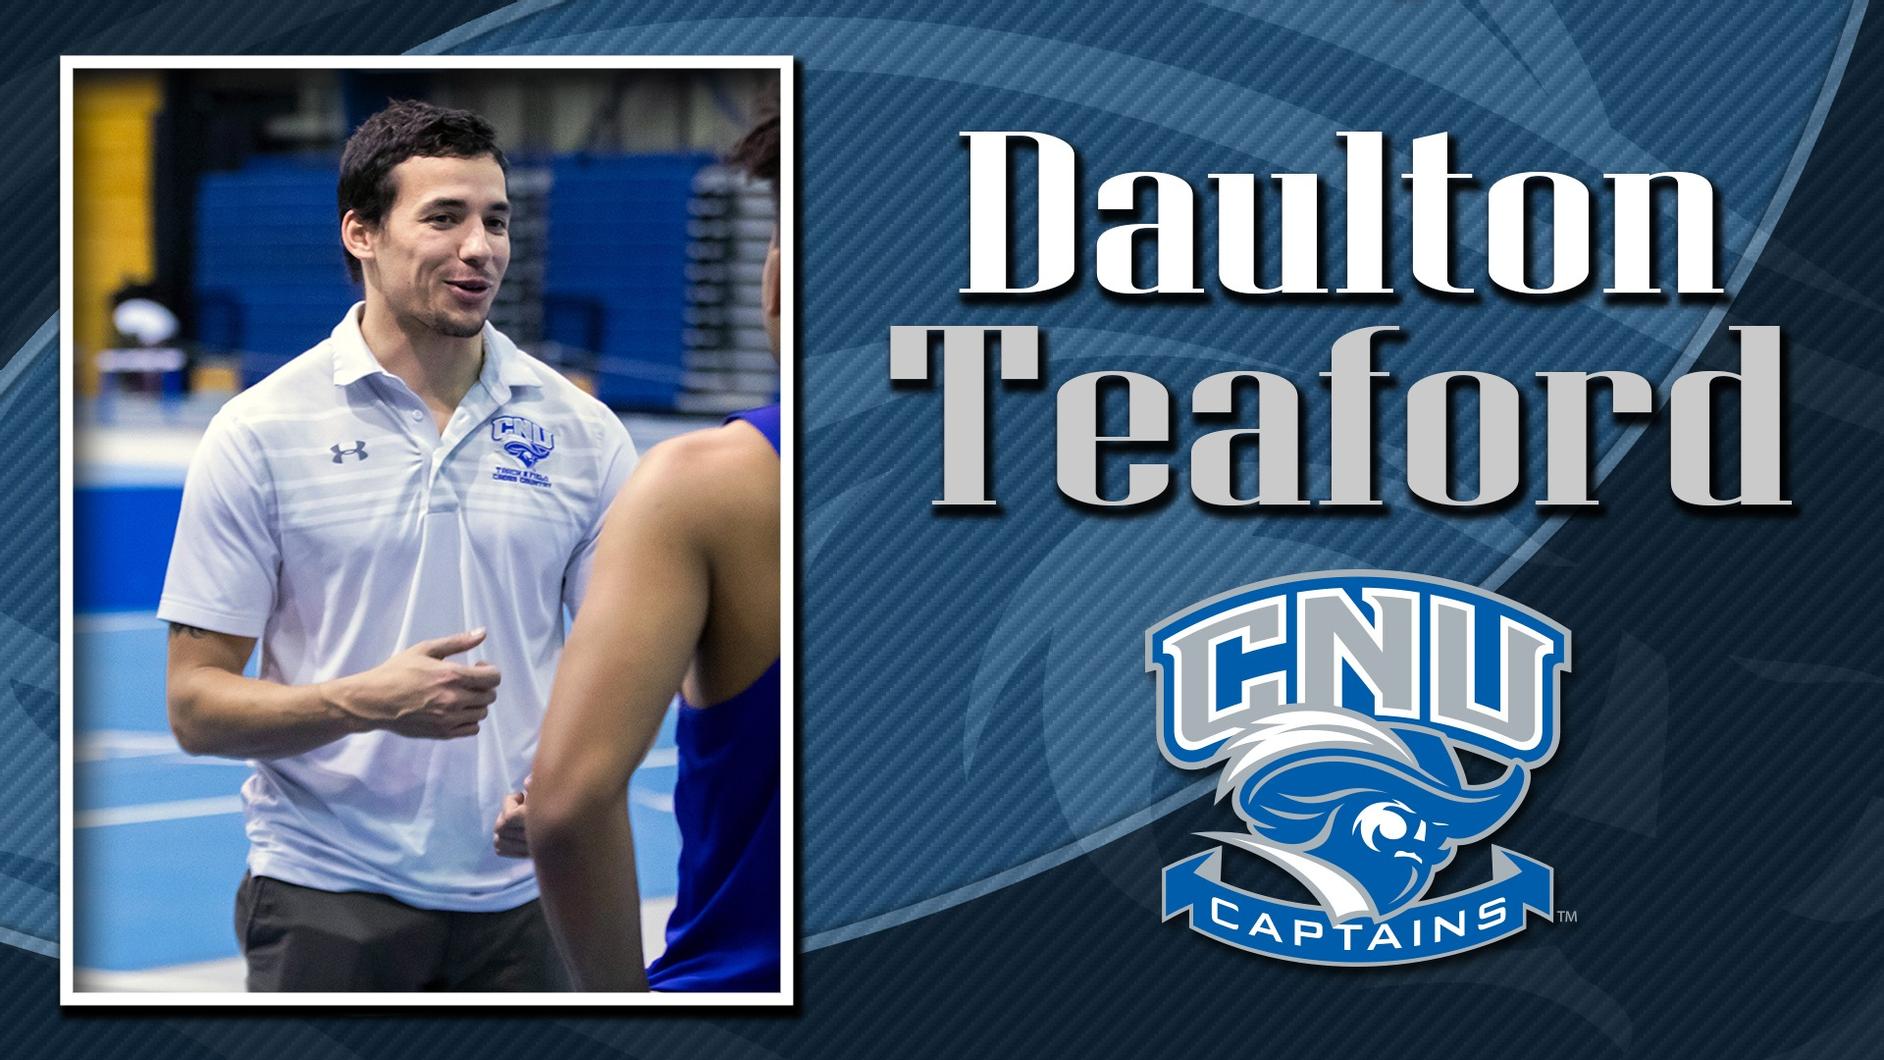 Daulton Teaford Named CNU Track & Field and Cross Country Head Coach for Sprints, Hurdles, and Jumps